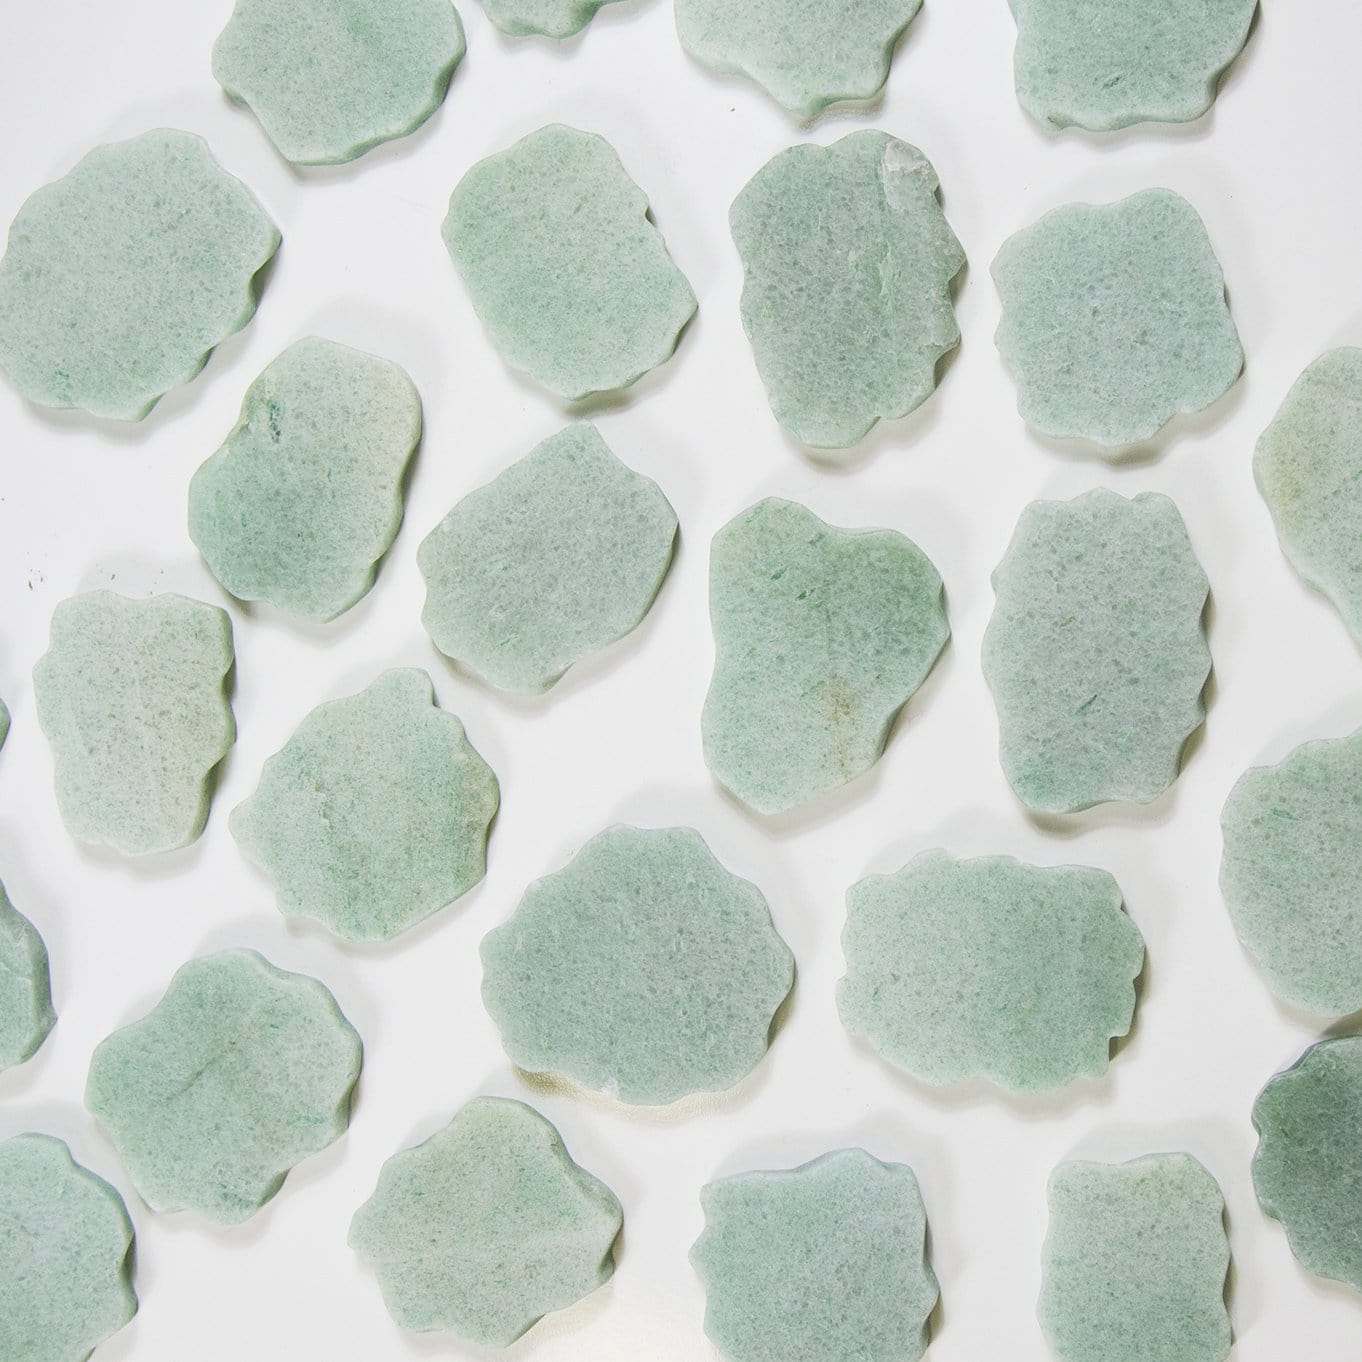 Several Amazonite Natural Stone Wedding Place Cards 